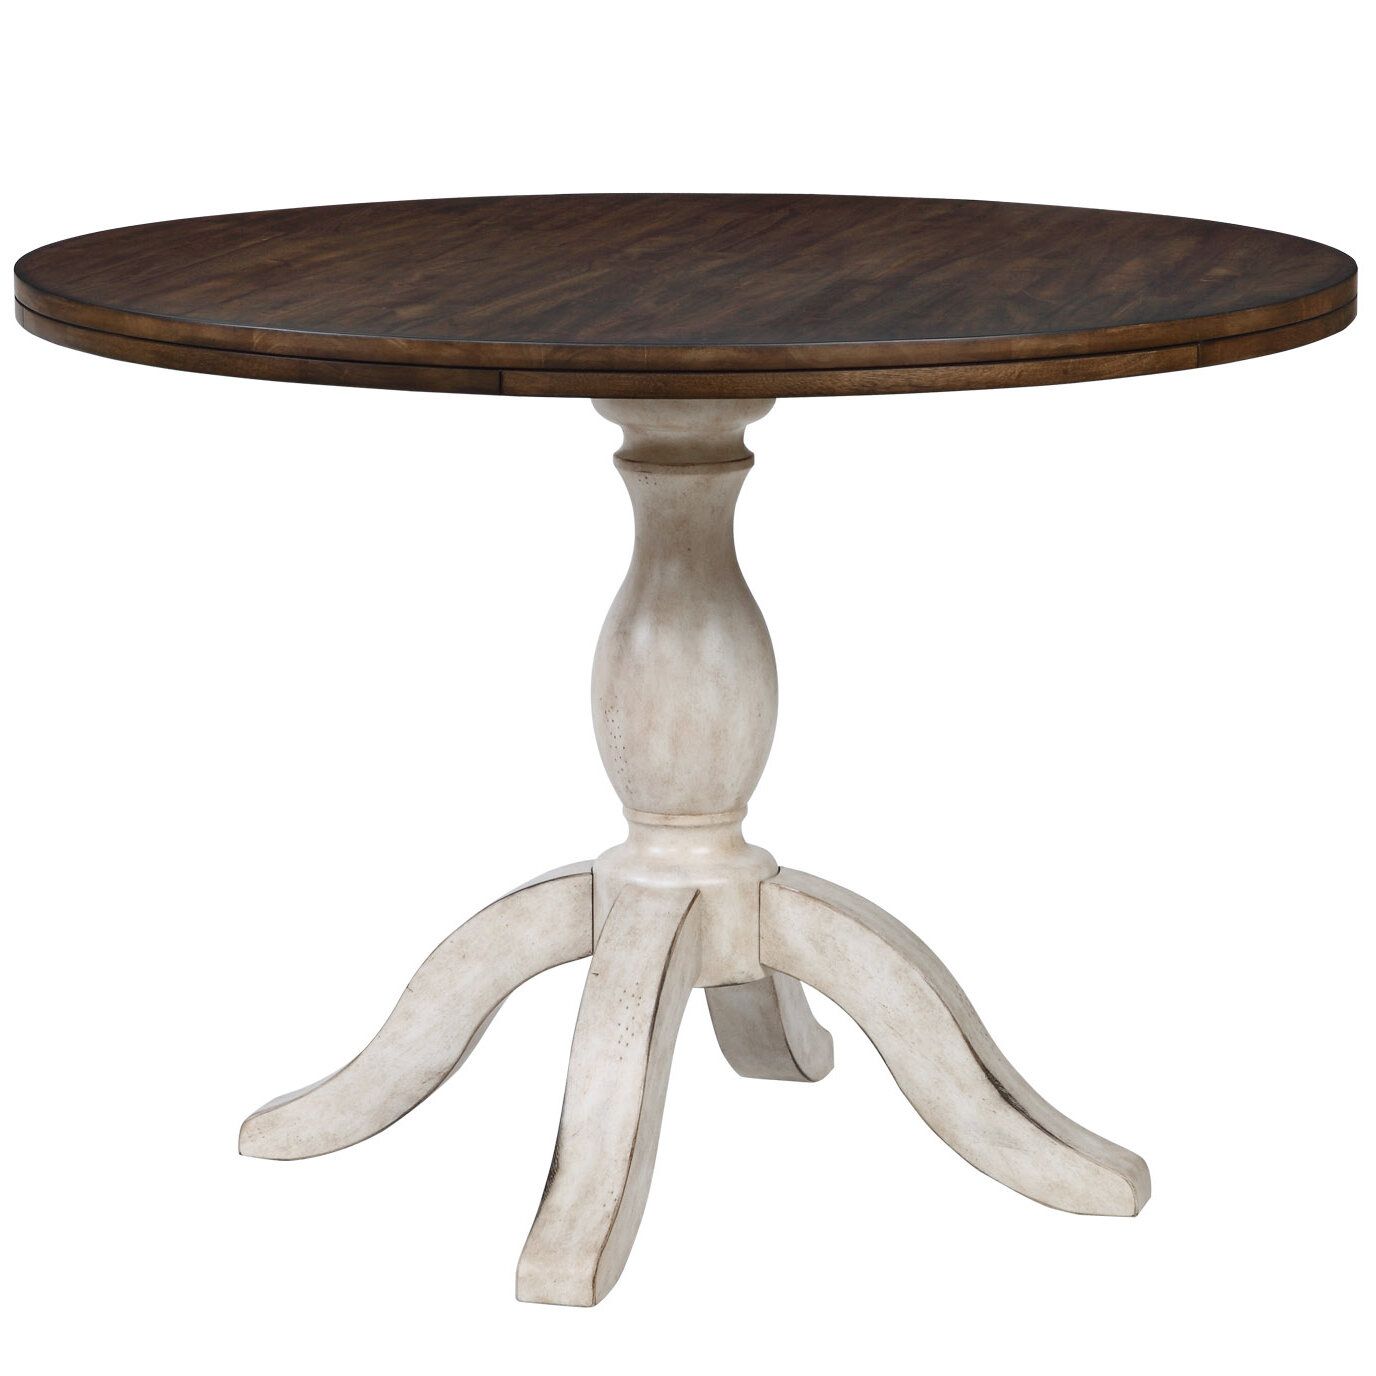 Culbertson Solid Wood Dining Table For Most Recent Christie Round Marble Dining Tables (View 23 of 25)